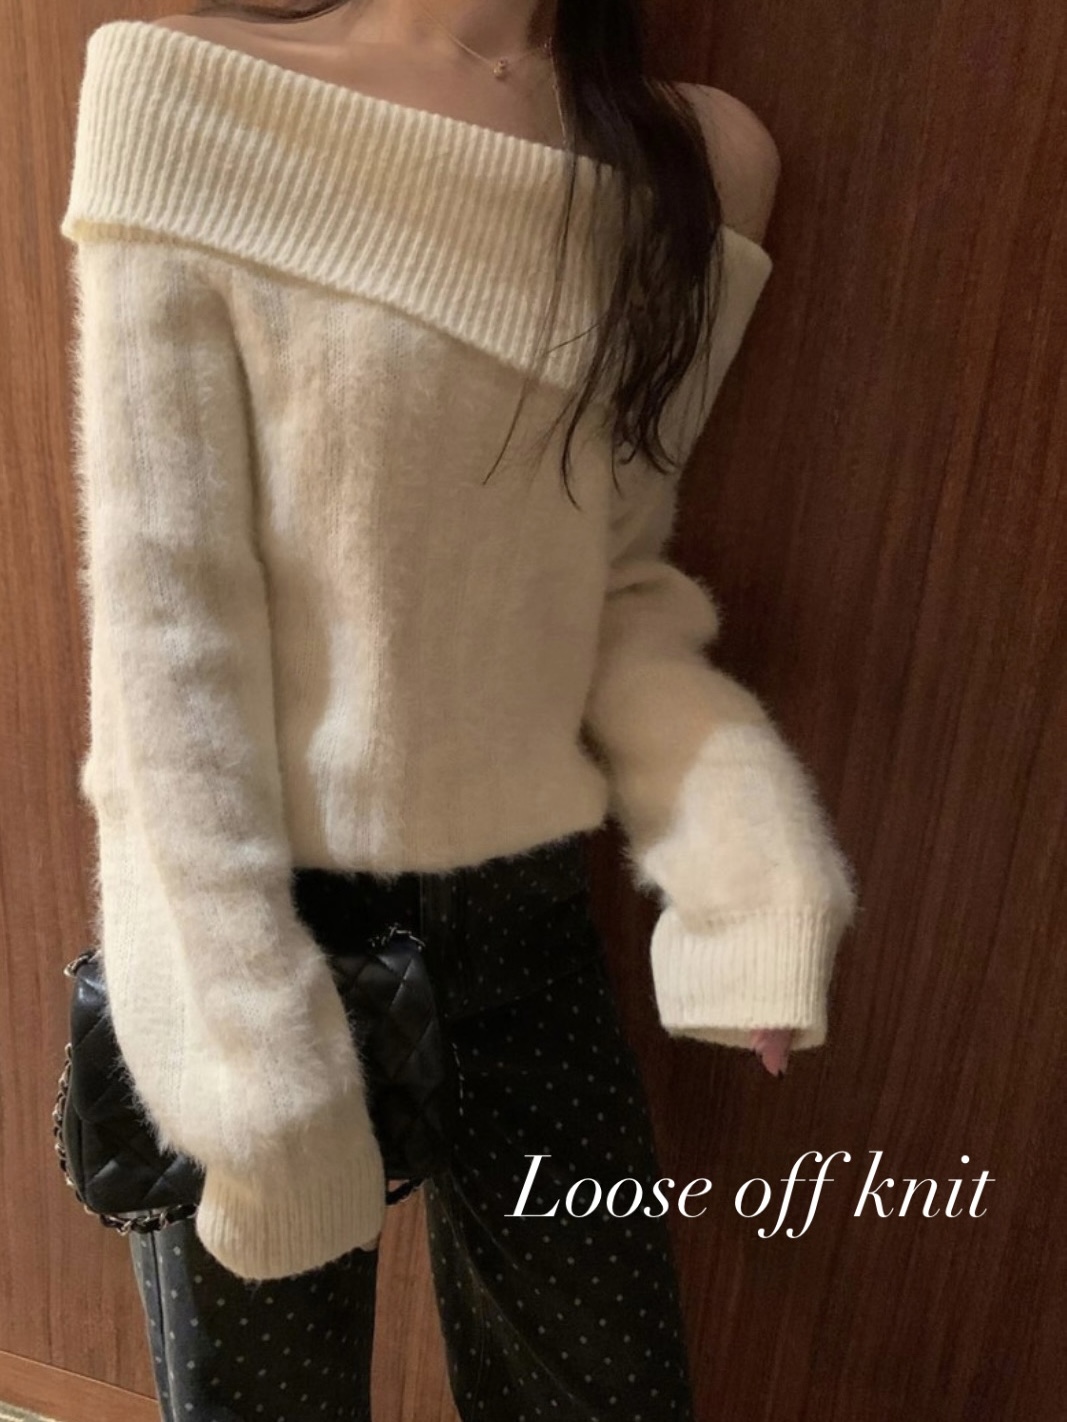 Loose off knit